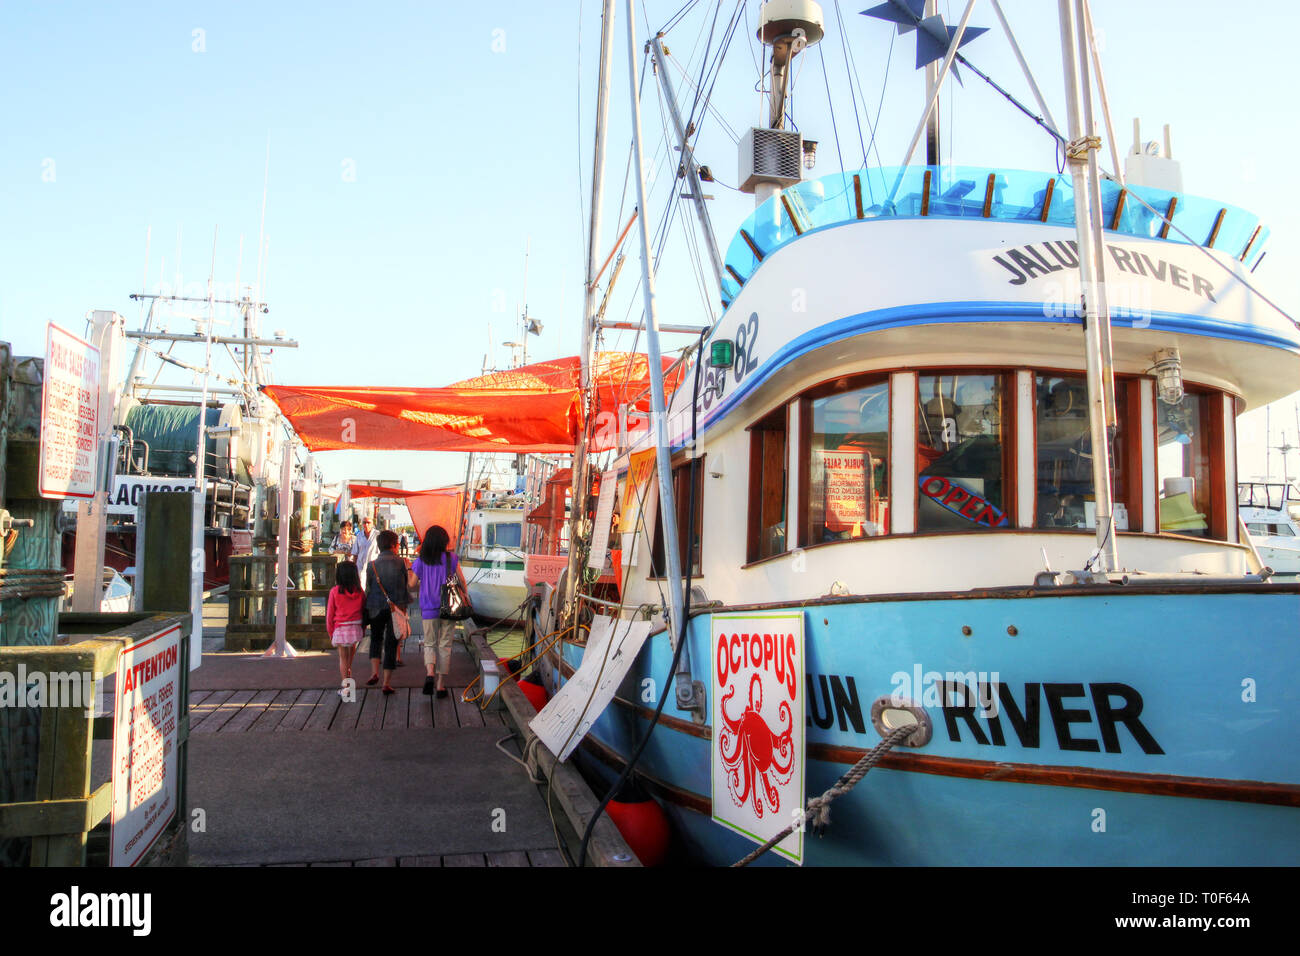 RICHMOND, CANADA - JUL 24, 2010: Fishing trawlers moored at the picturesque seaside village of Steveston's Fisherman's Wharf selling the day's catch a Stock Photo